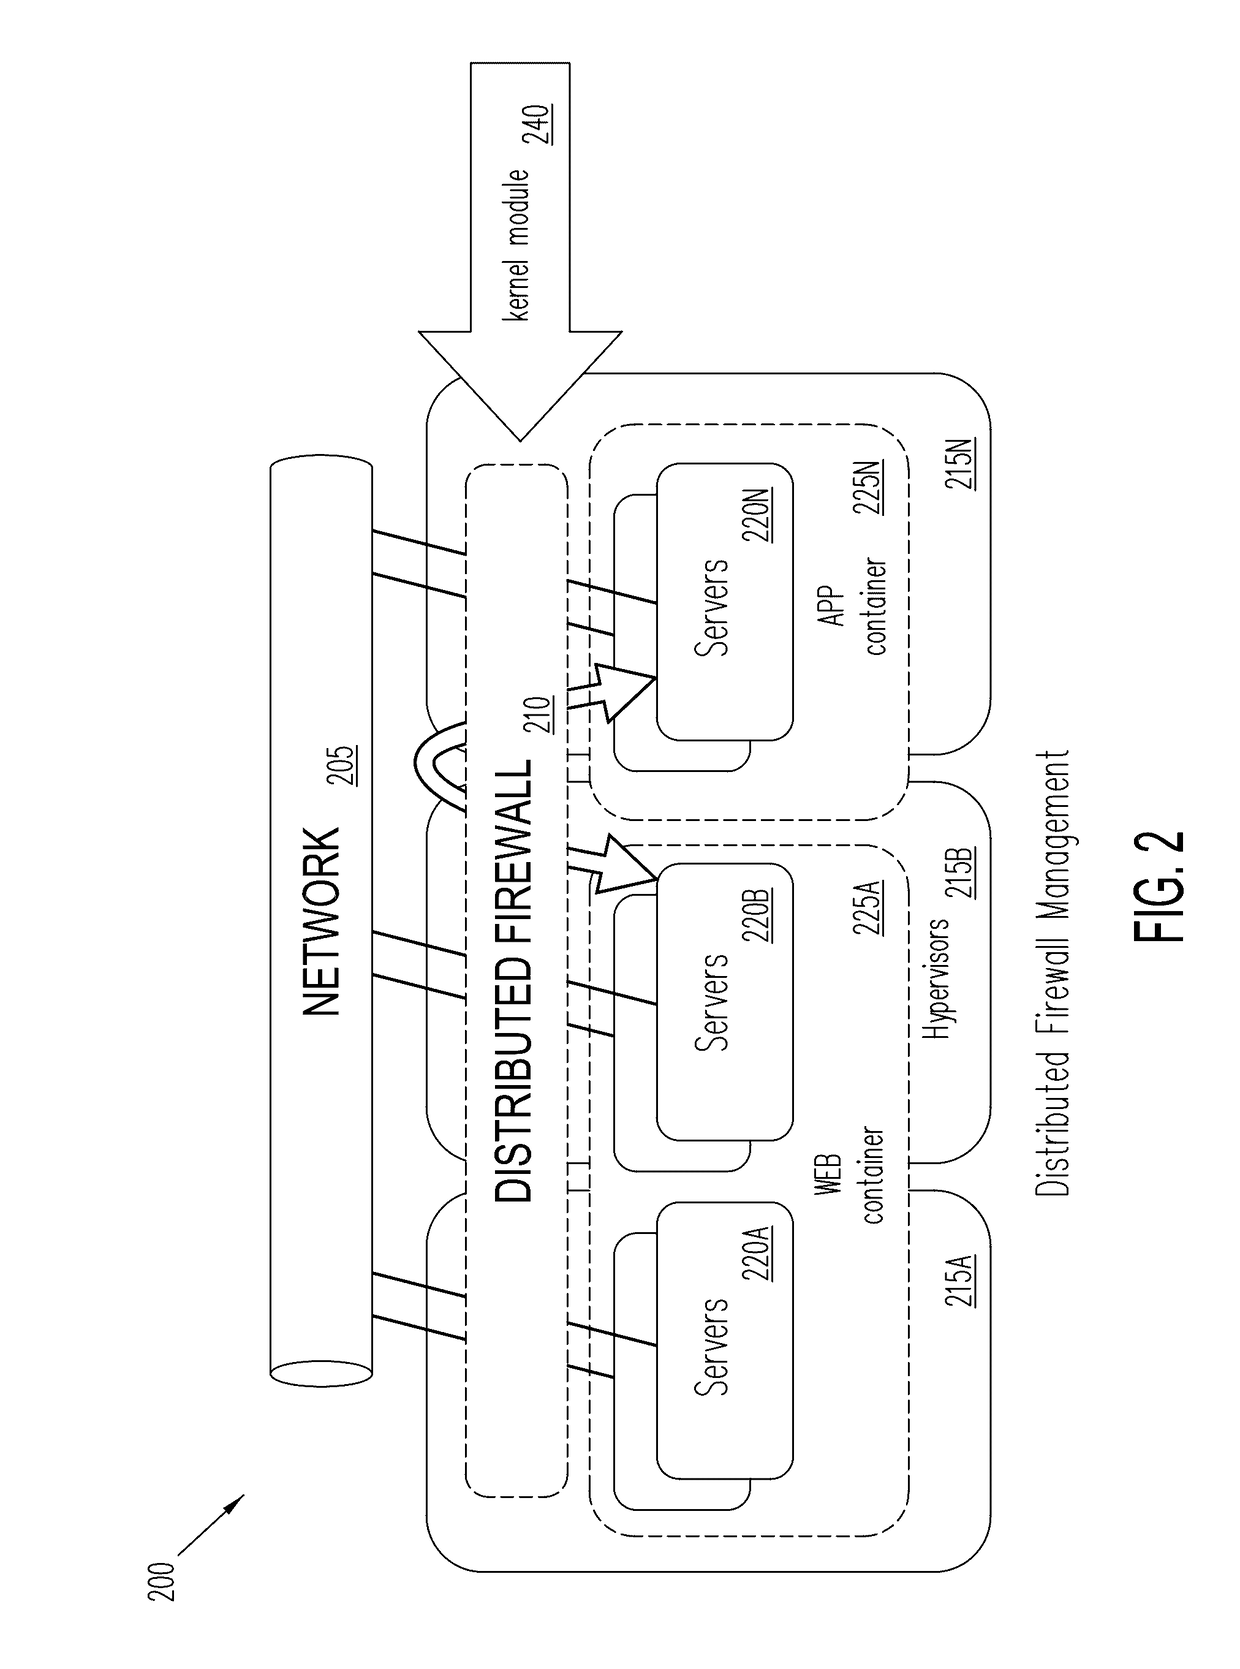 Distributed firewalls and virtual network services using network packets with security tags